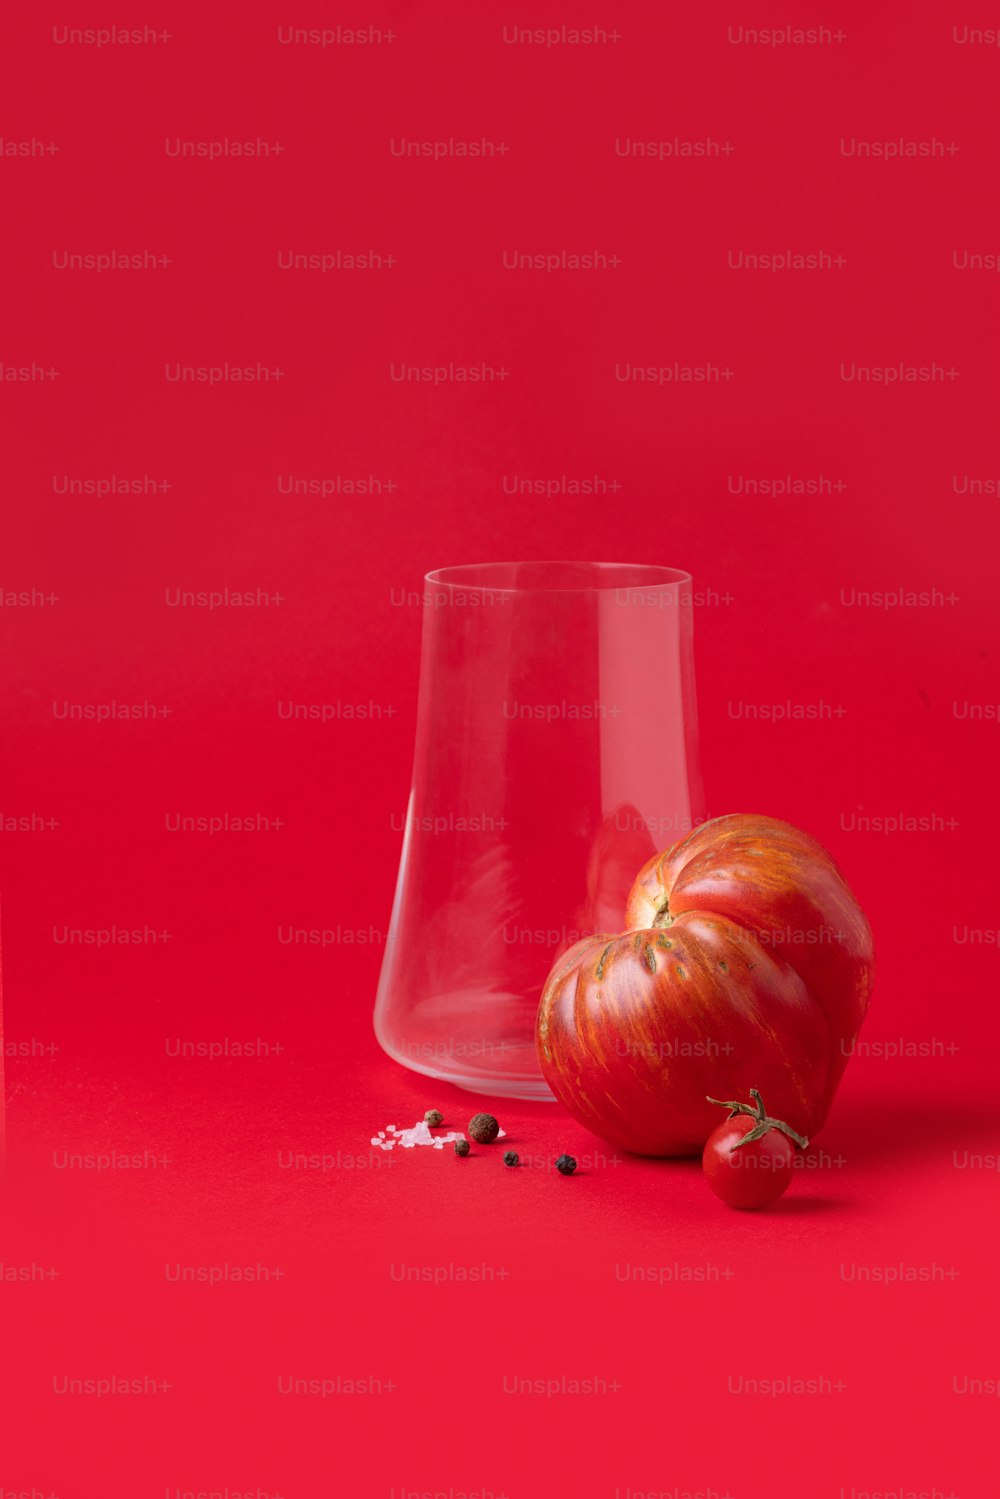 a red apple and a clear glass on a red background